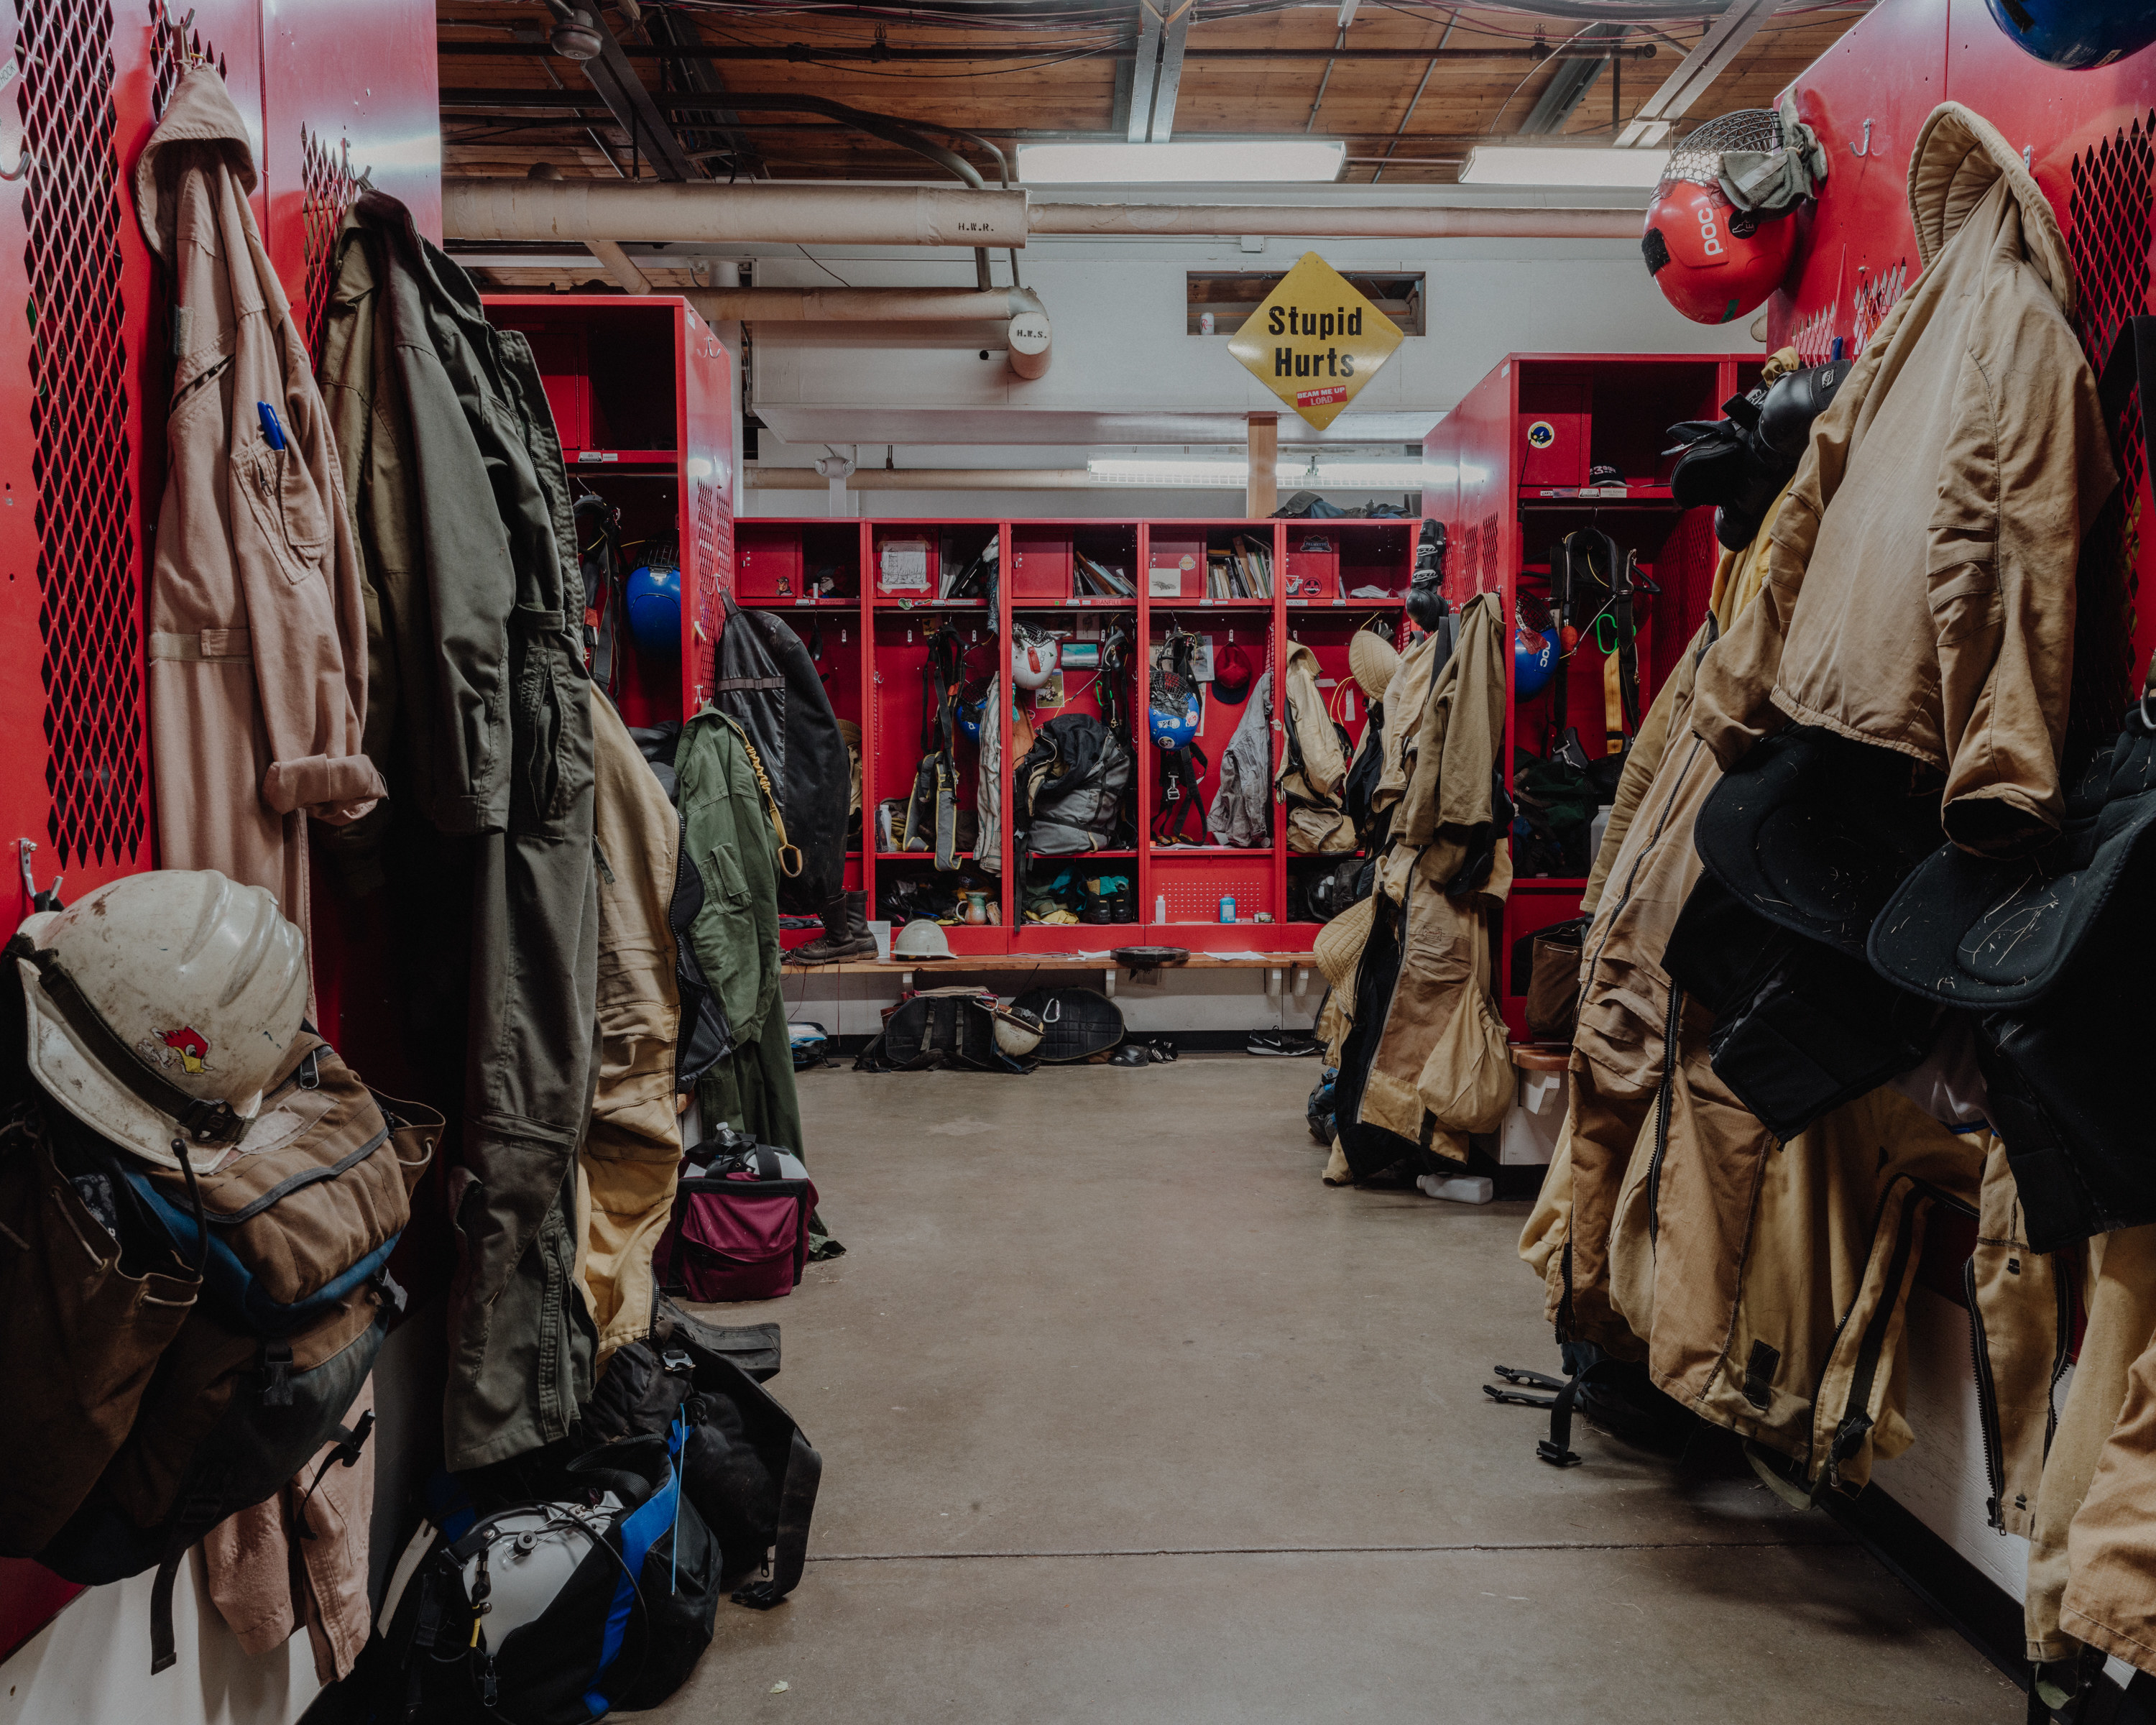 A locker room filled with firefighter equipment and a sign that reads &quot;stupid hurts&quot;